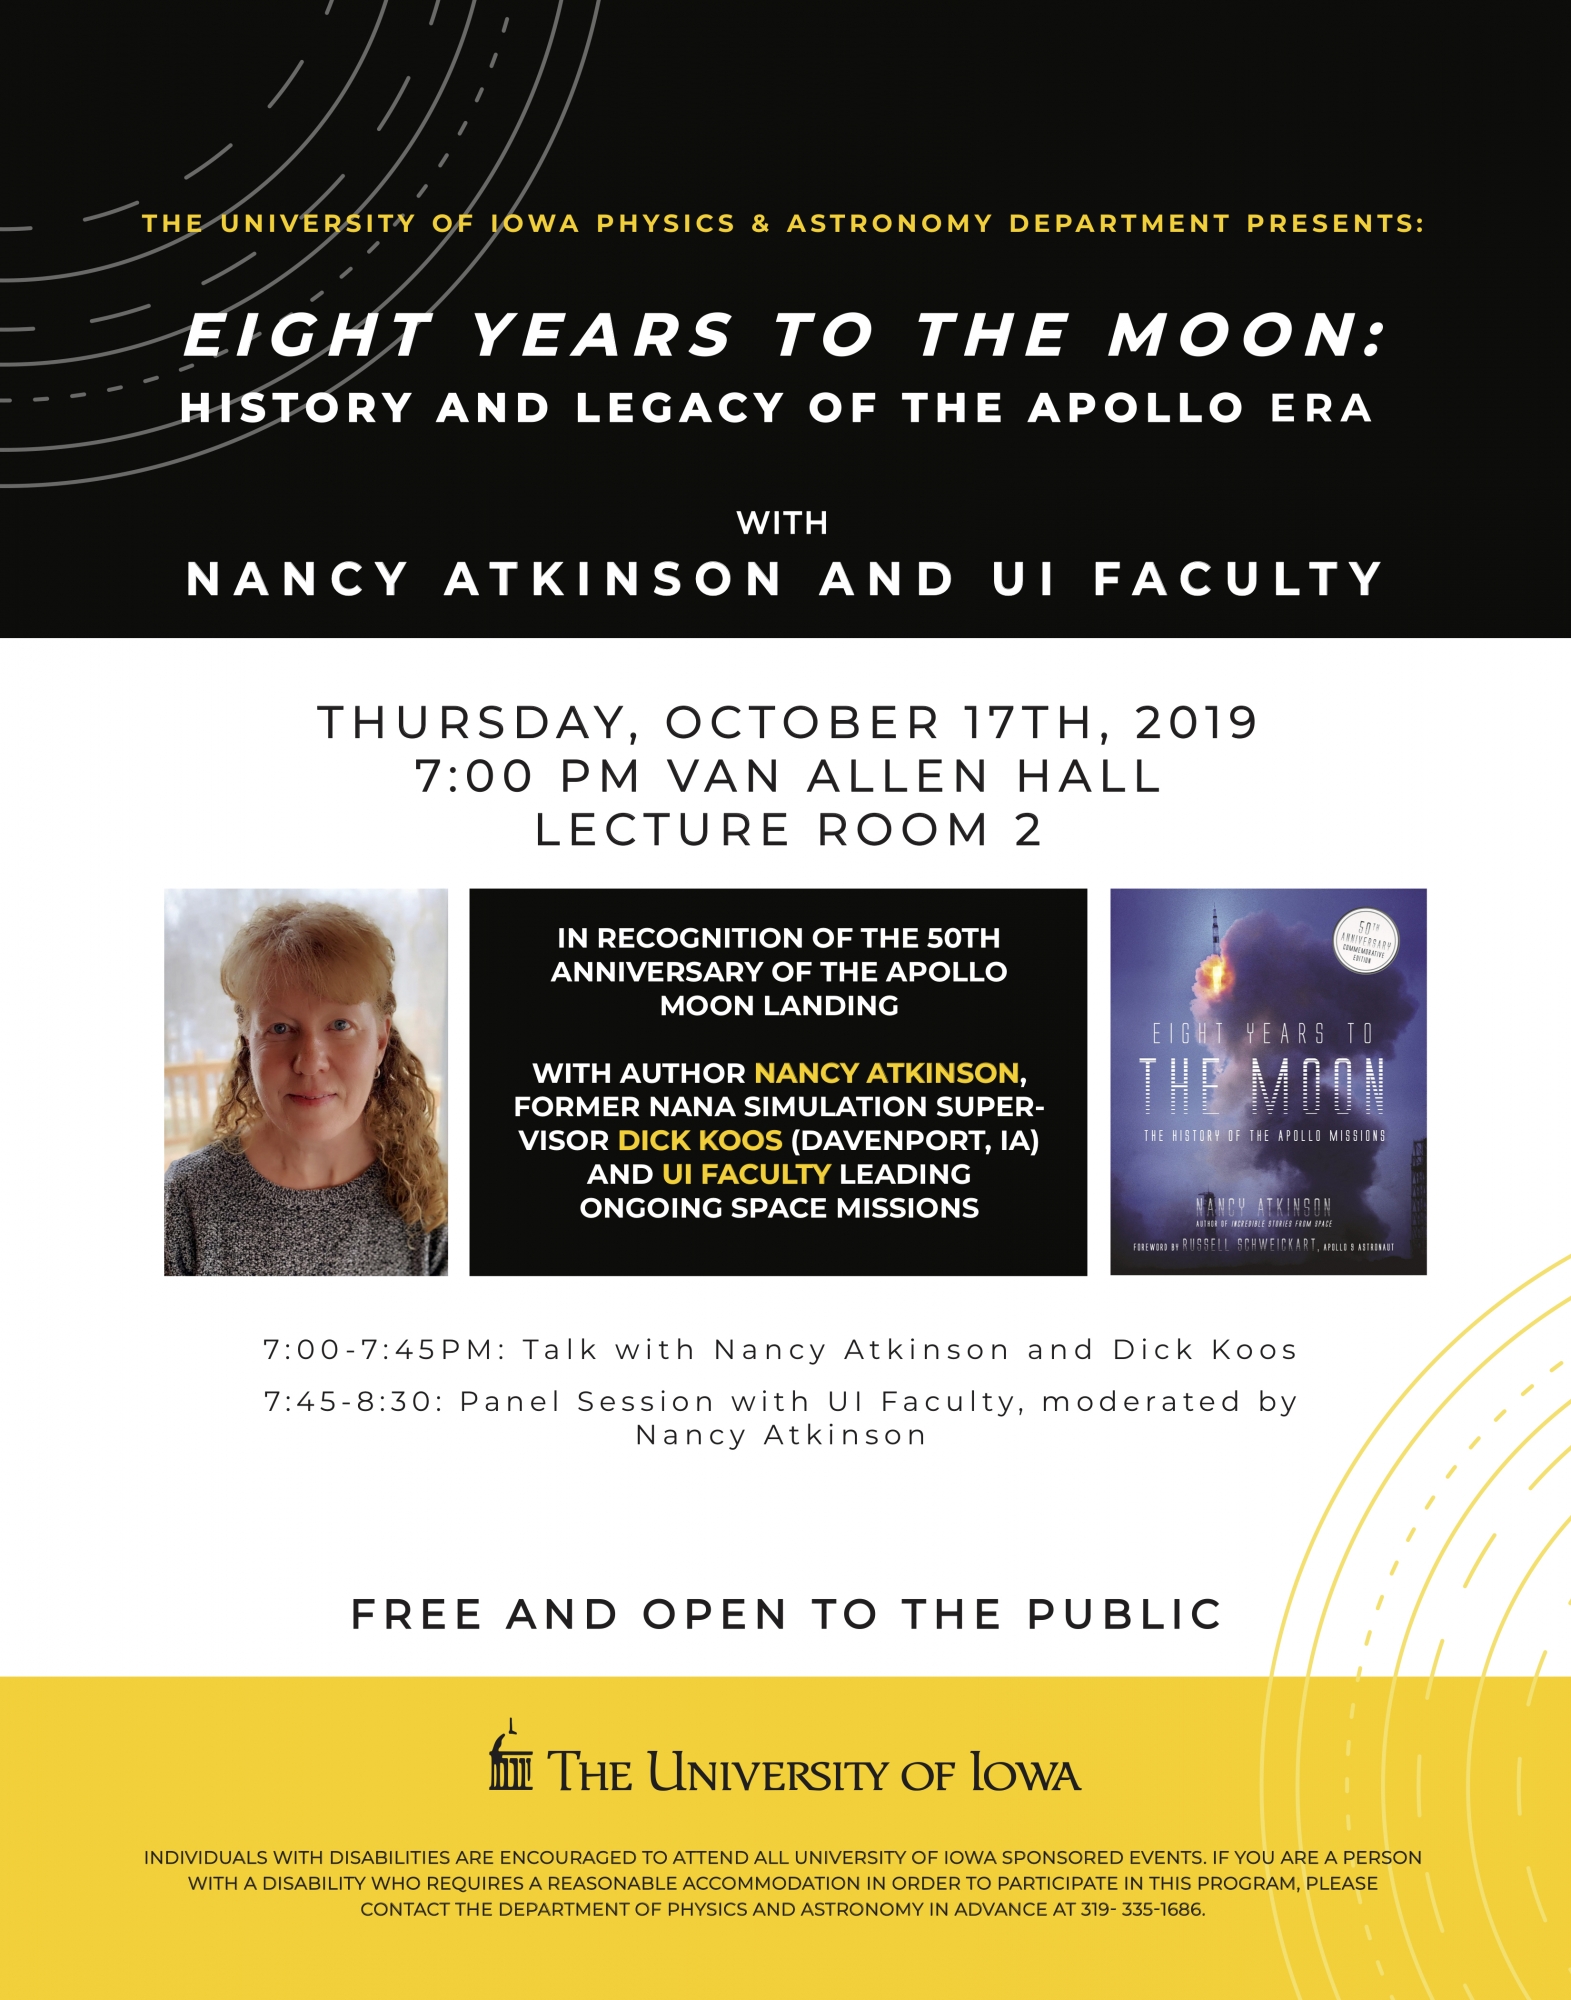 Eight Years to the Moon: History and Legacy of the Apollo Era with Nancy Atkinson and UI Faculty